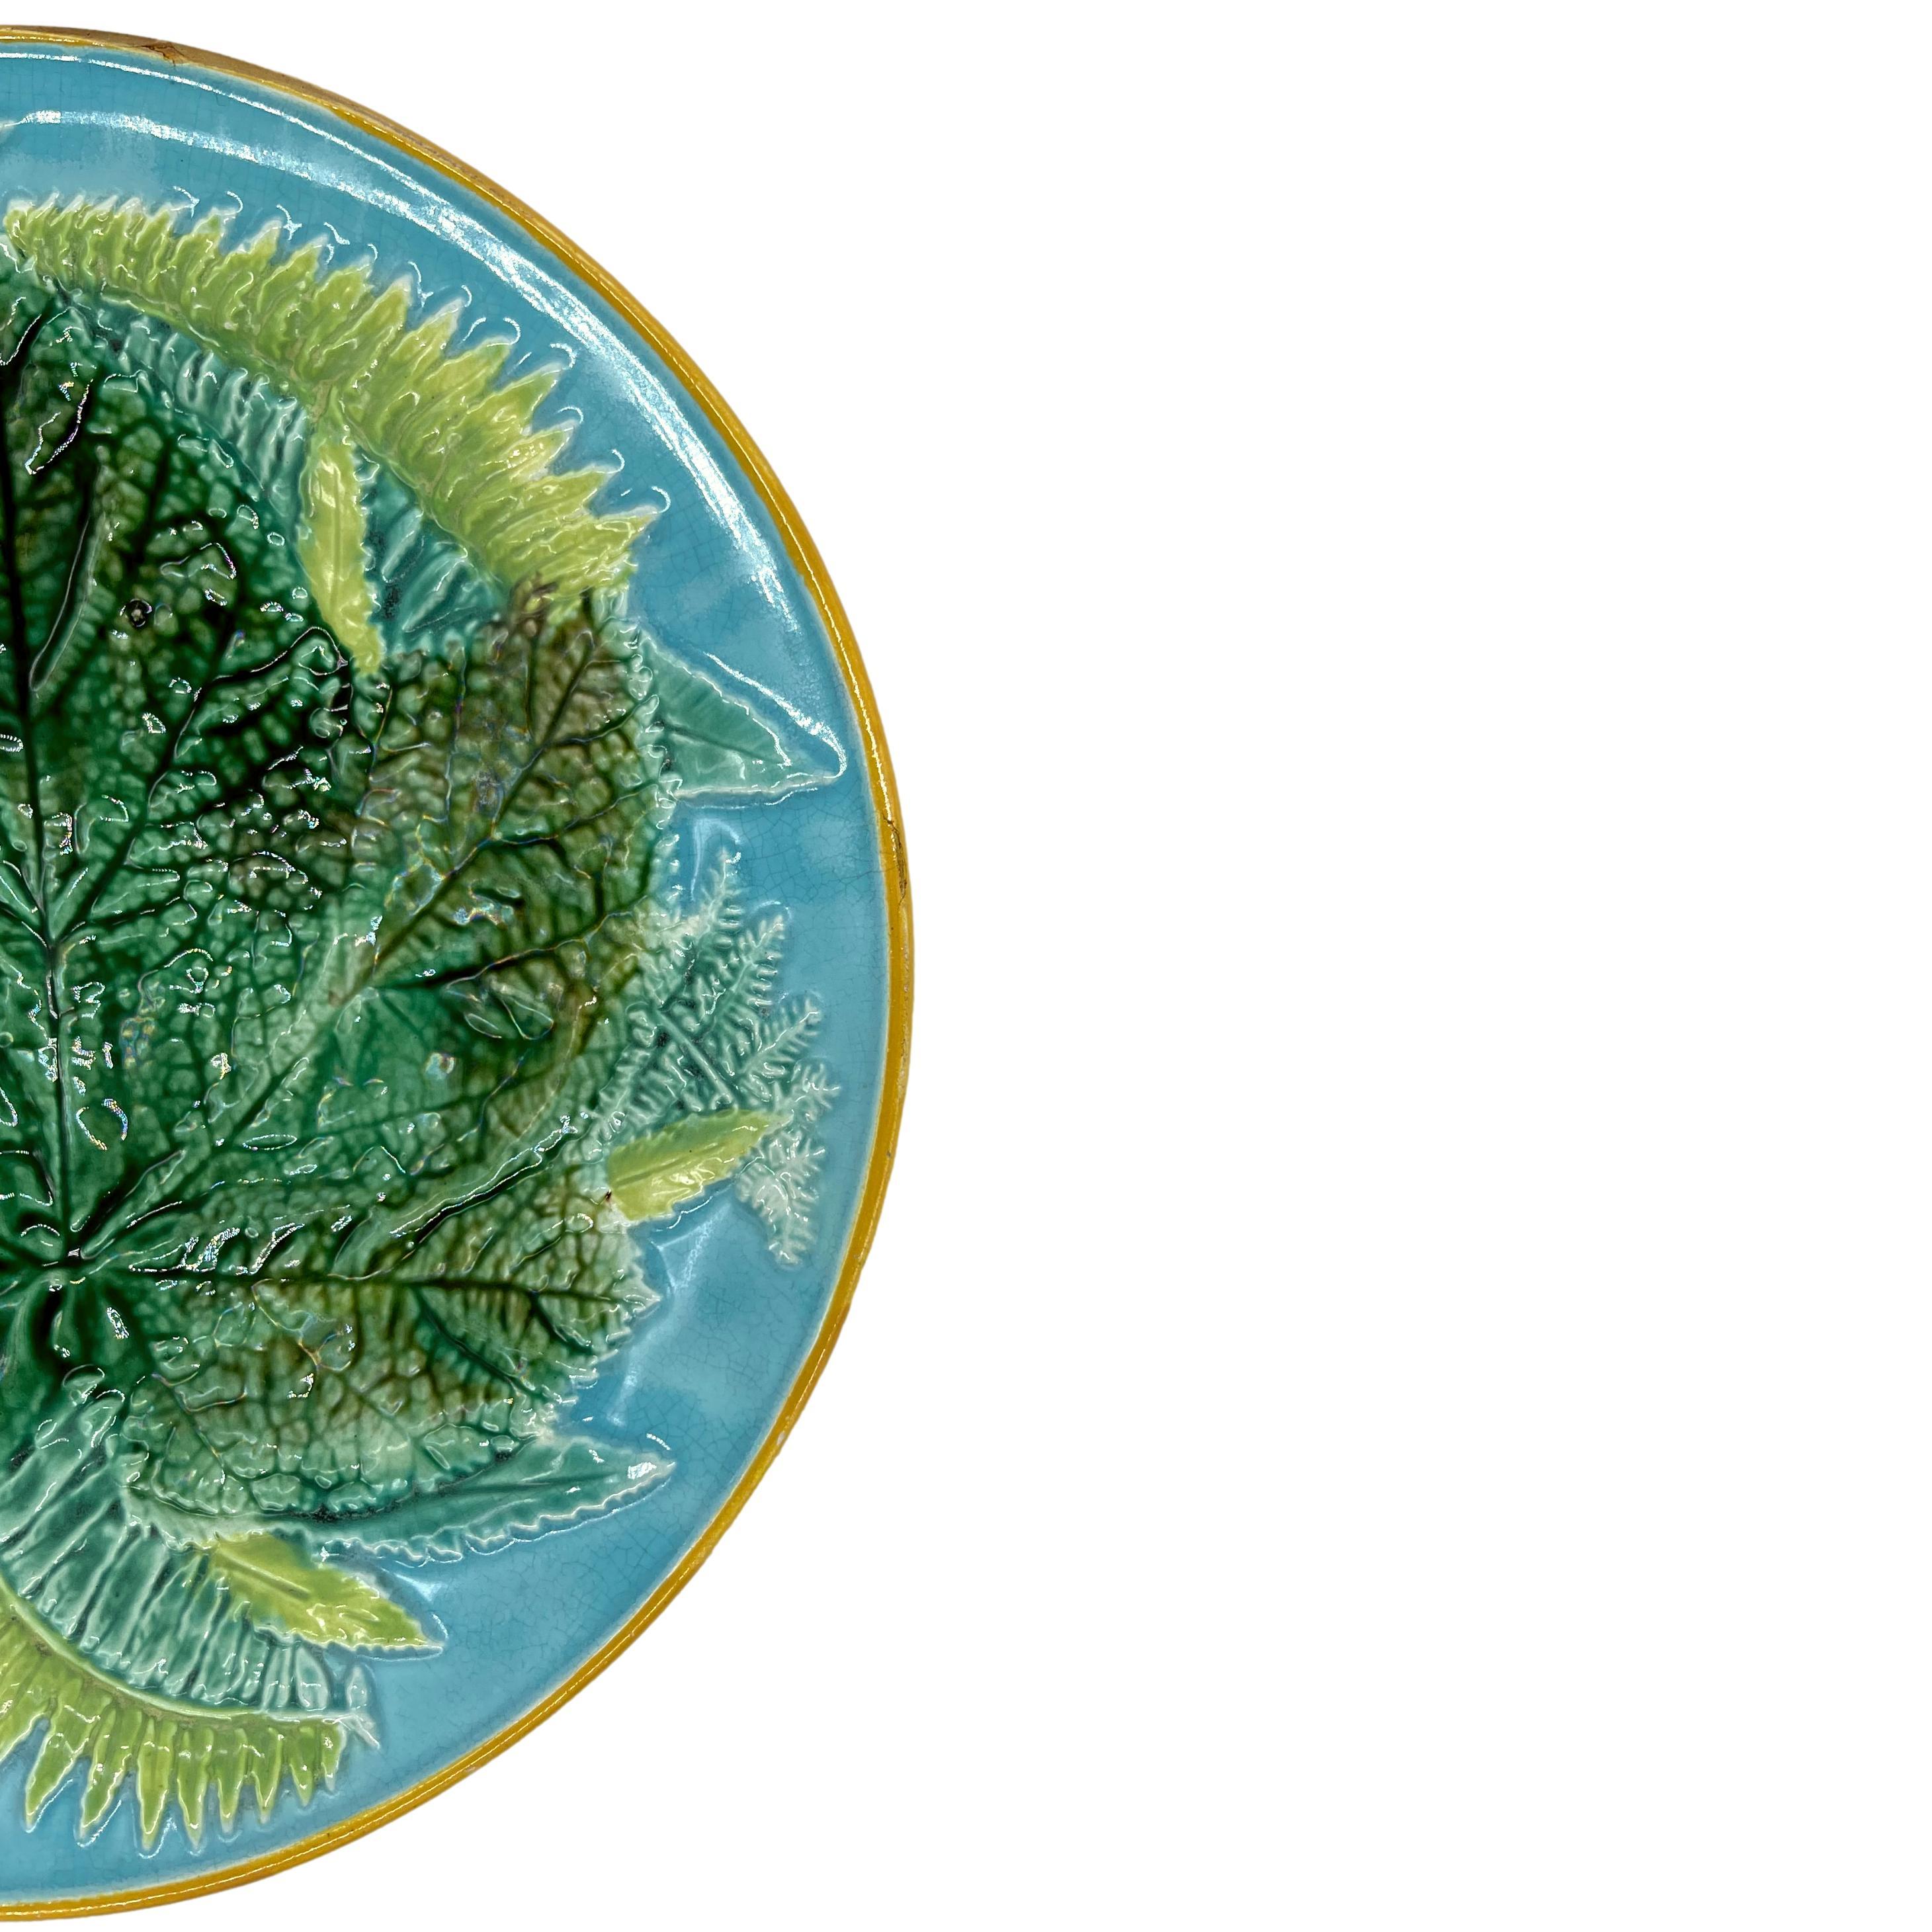 Victorian George Jones Majolica Maple Leaf and Ferns Plate on Turquoise Ground, ca. 1870